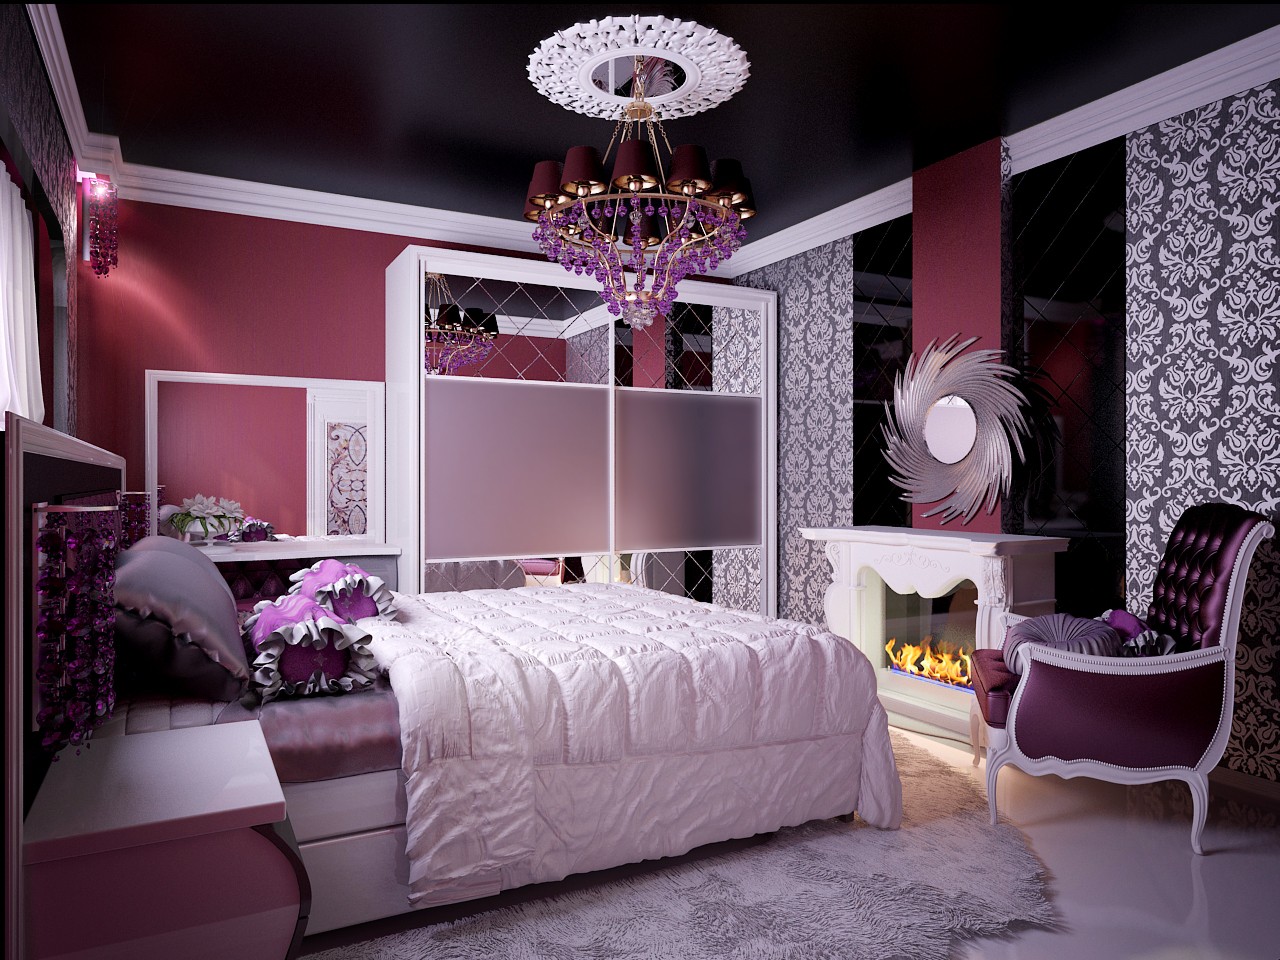 Young Woman's Bedroom Decorating Ideas